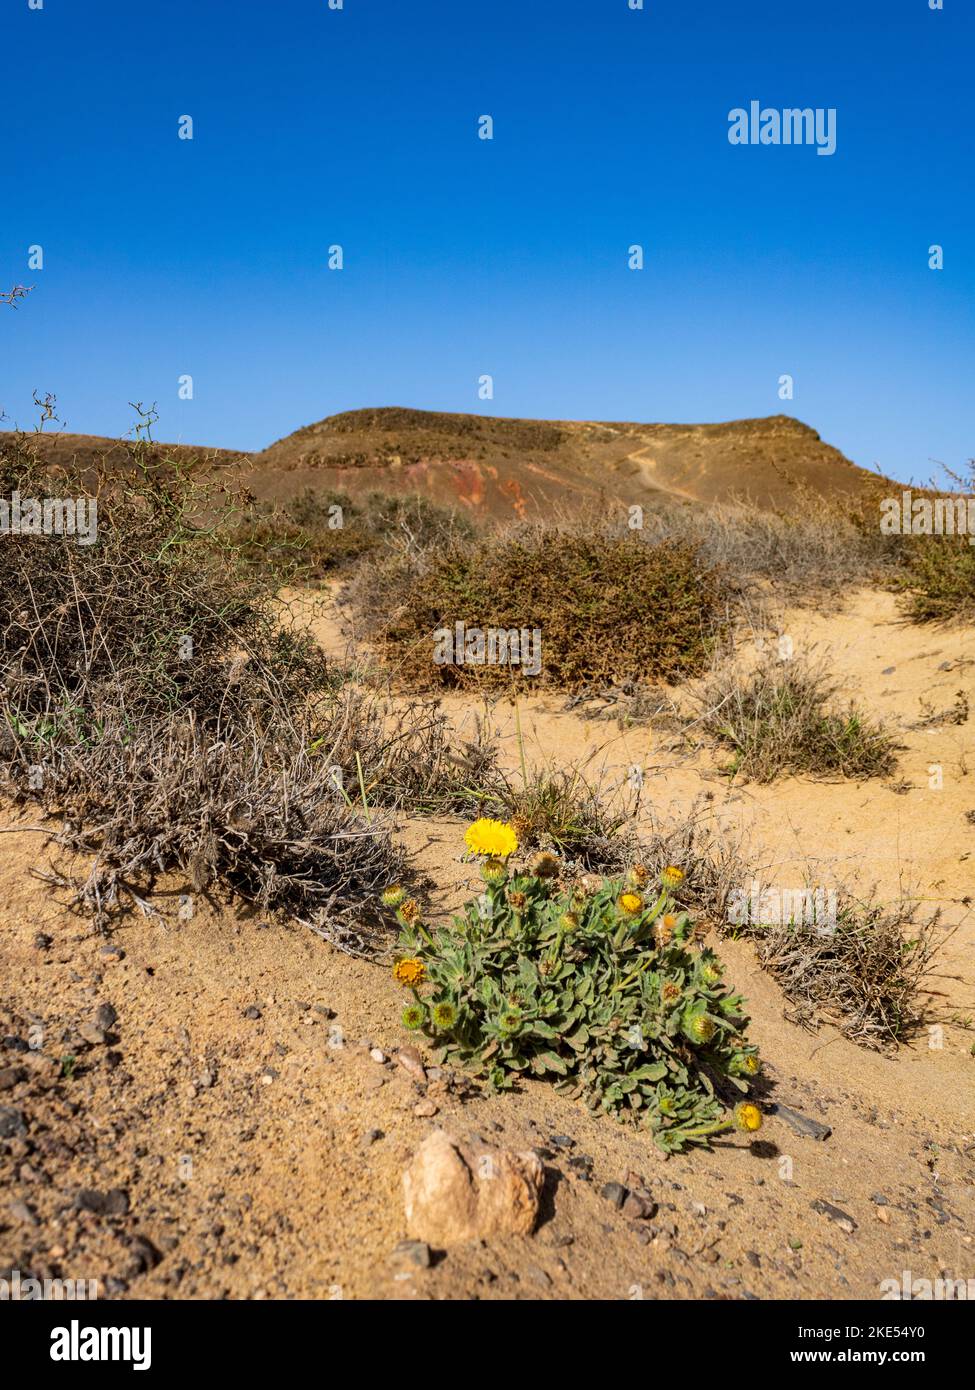 Canary Fleabane (Pulicaria canariensis) flowering, growing in desert, Lanzarote, Canary Islands, Spain. Stock Photo